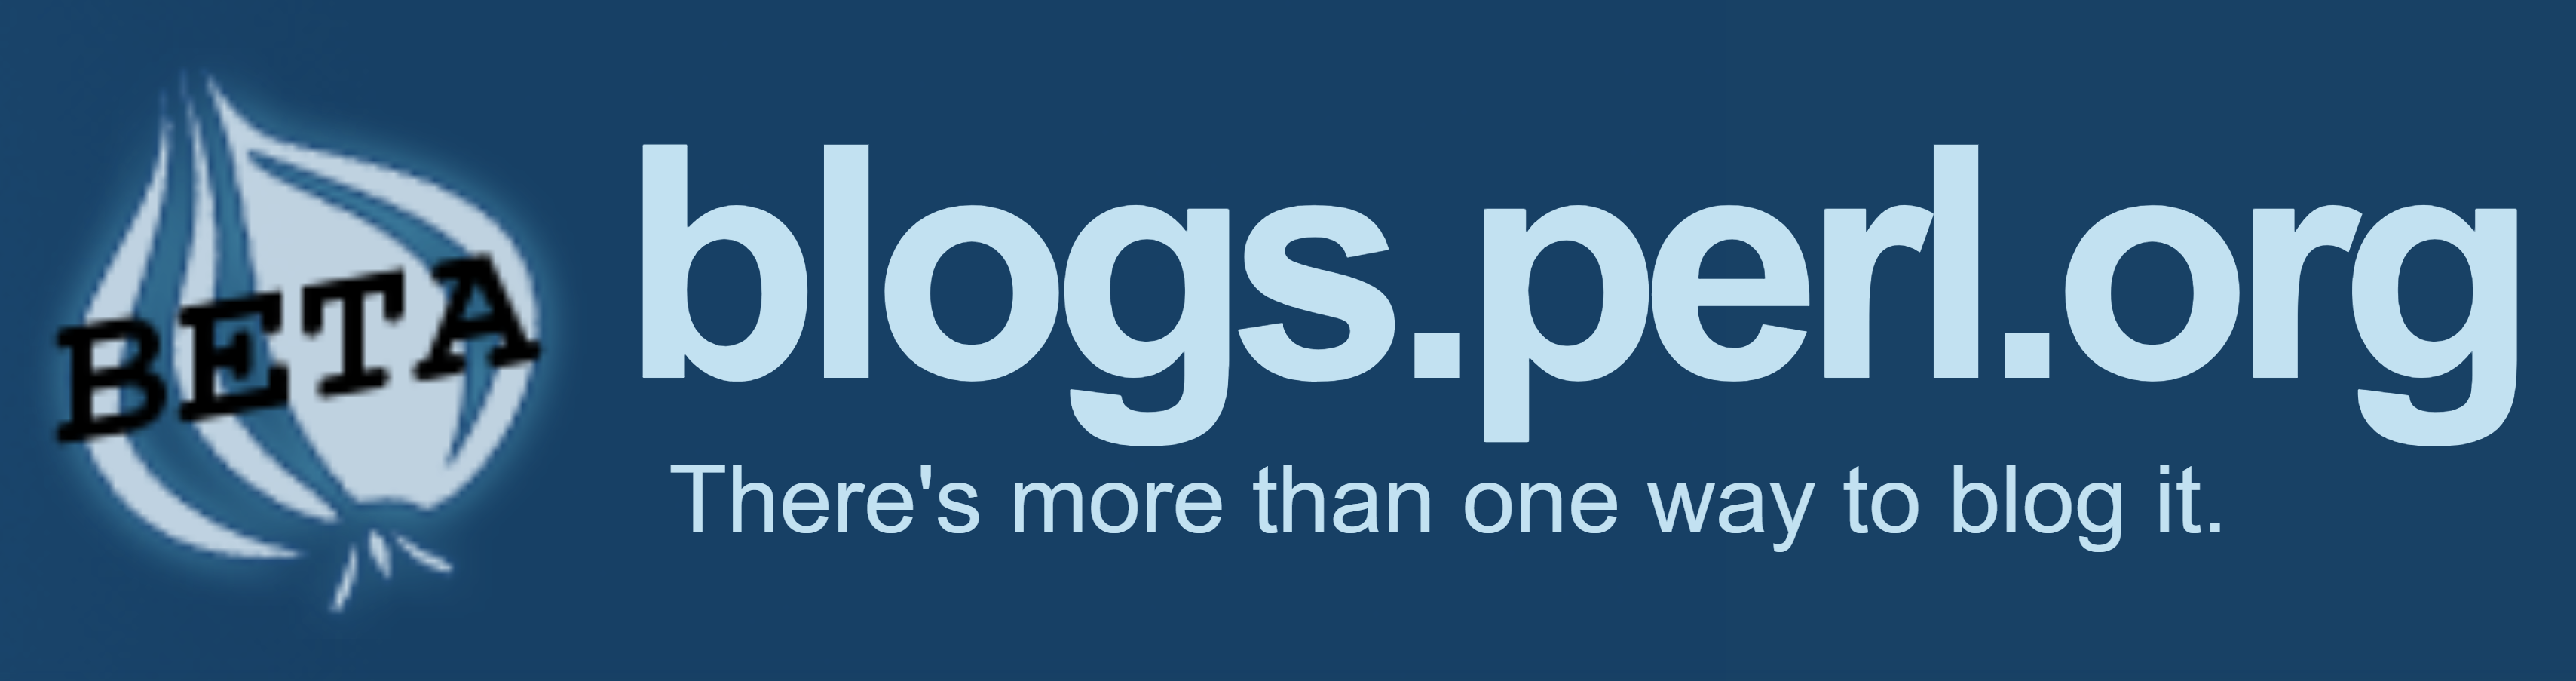 blogs.perl.org